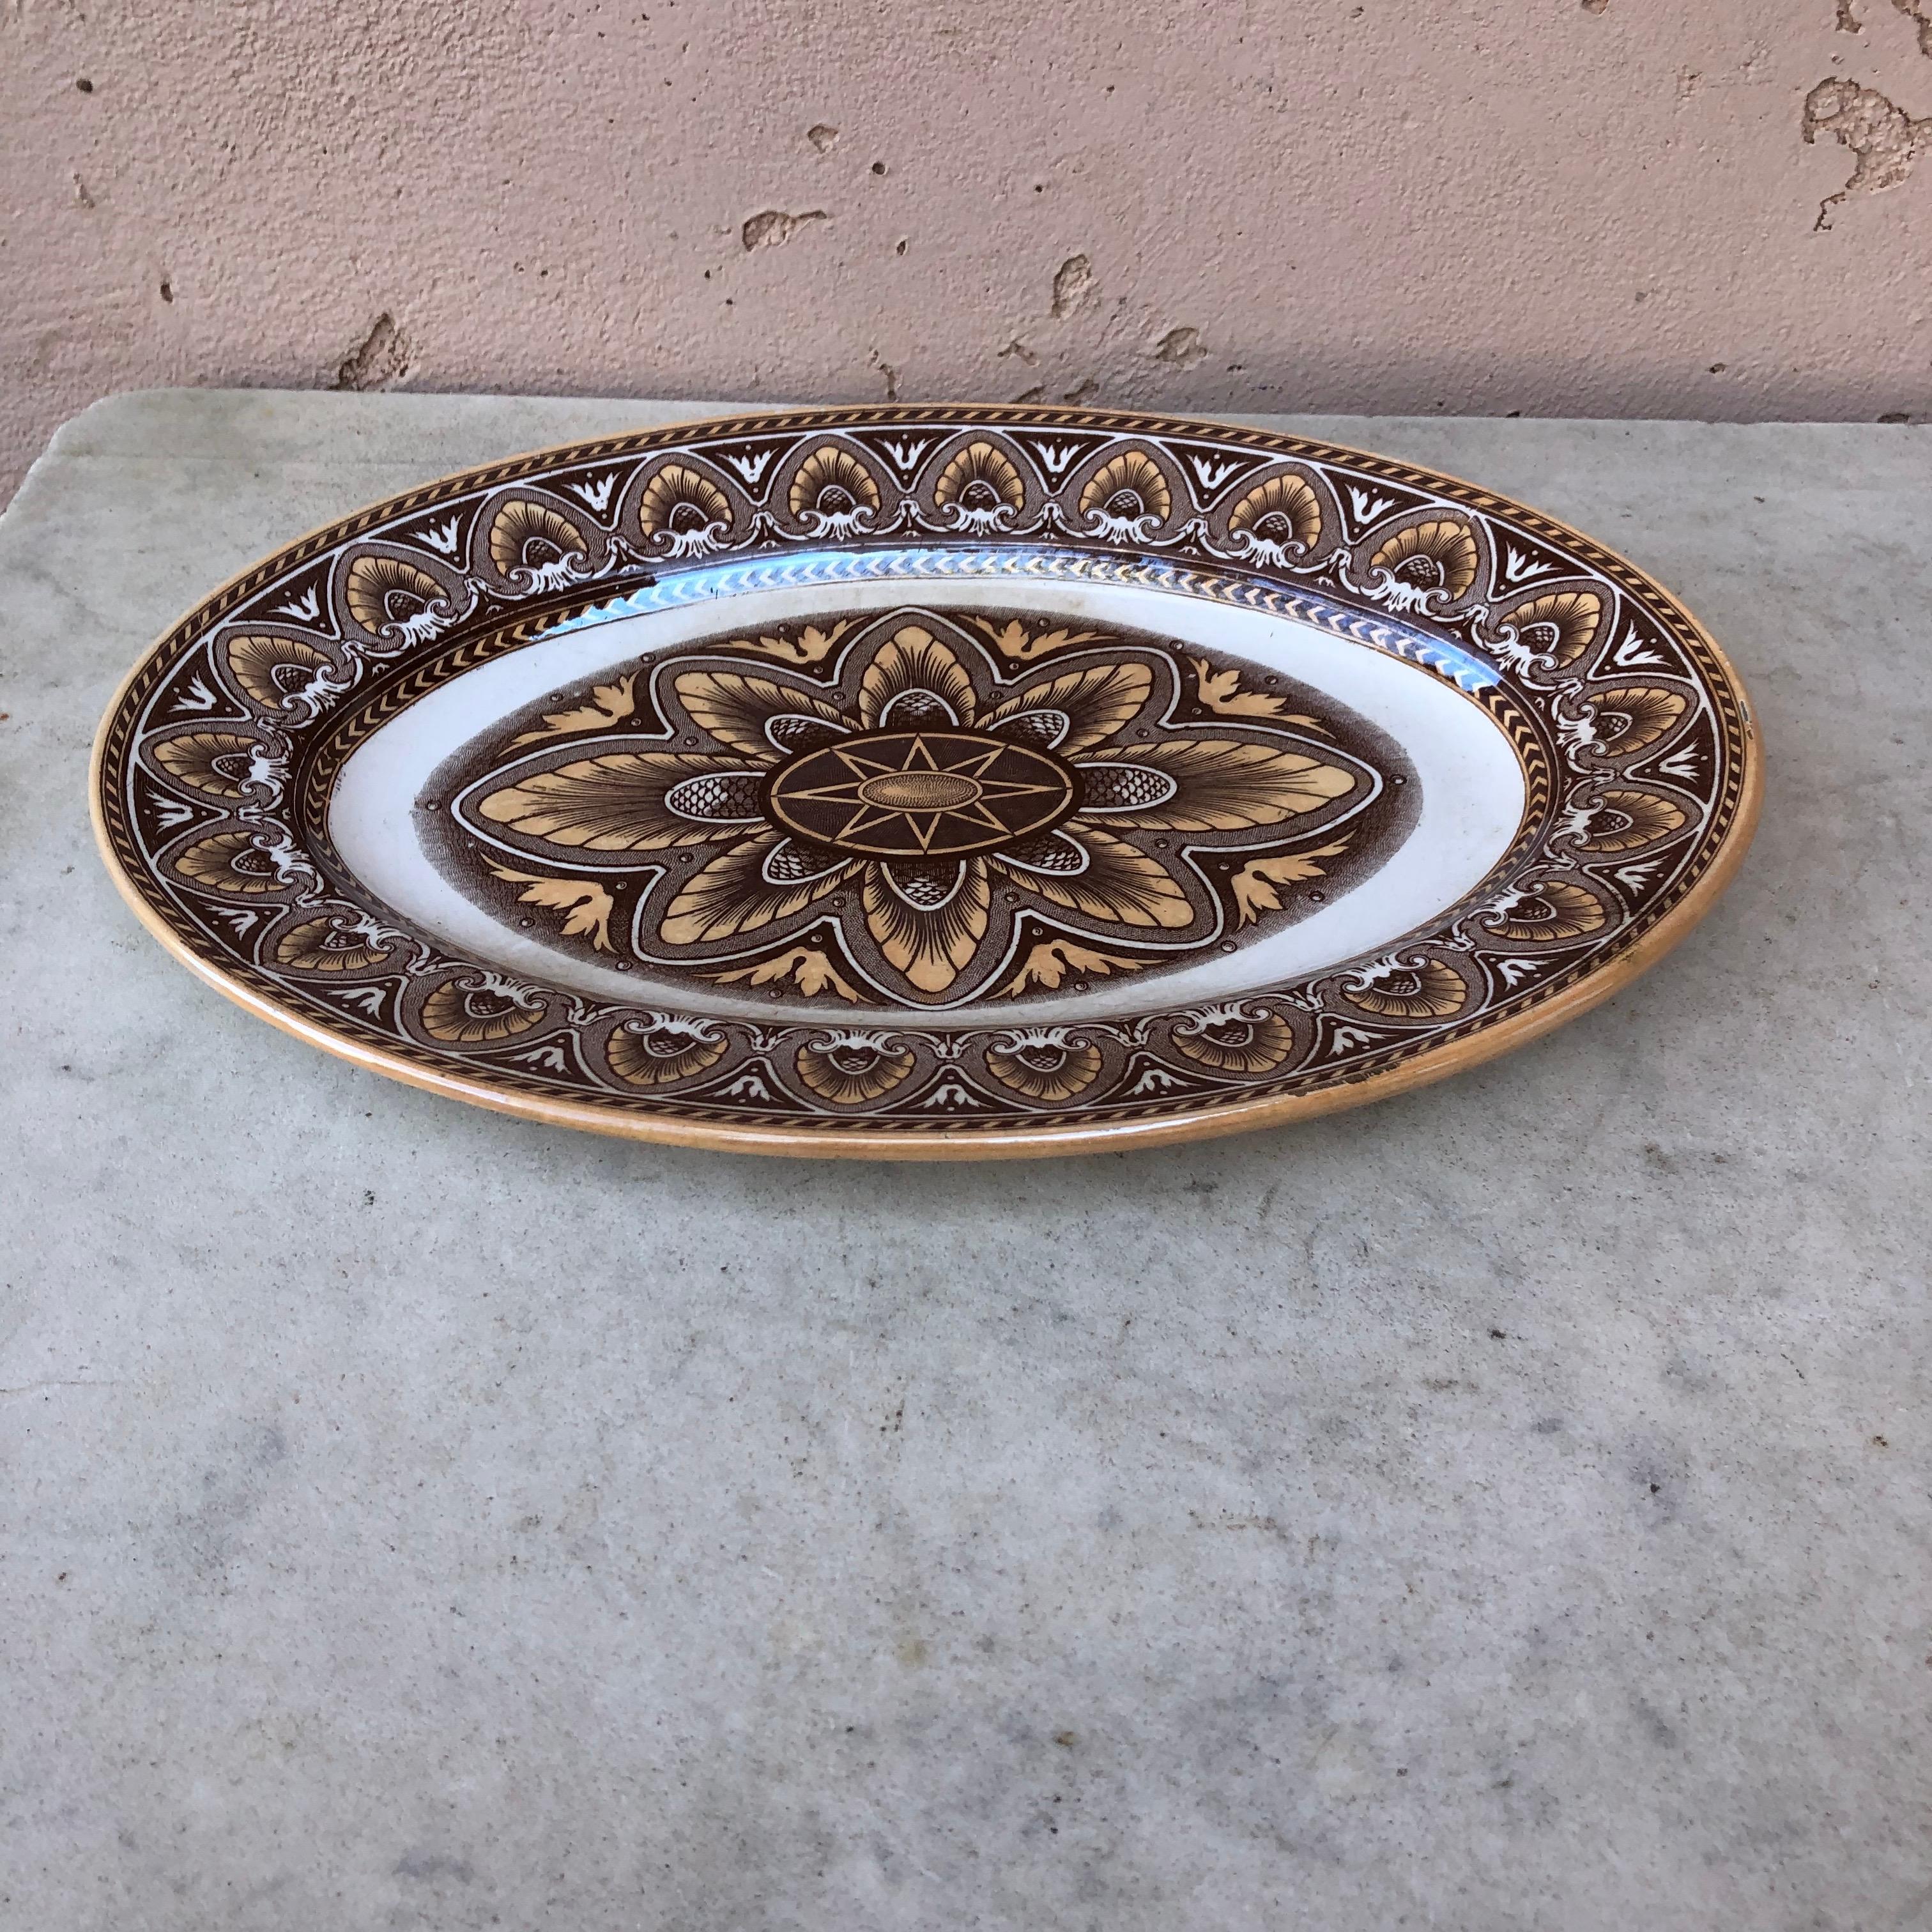 Small French Faience oval platter Model Italia signed Sarreguemines circa 1890.
Rare pattern.
Measures: 11.3